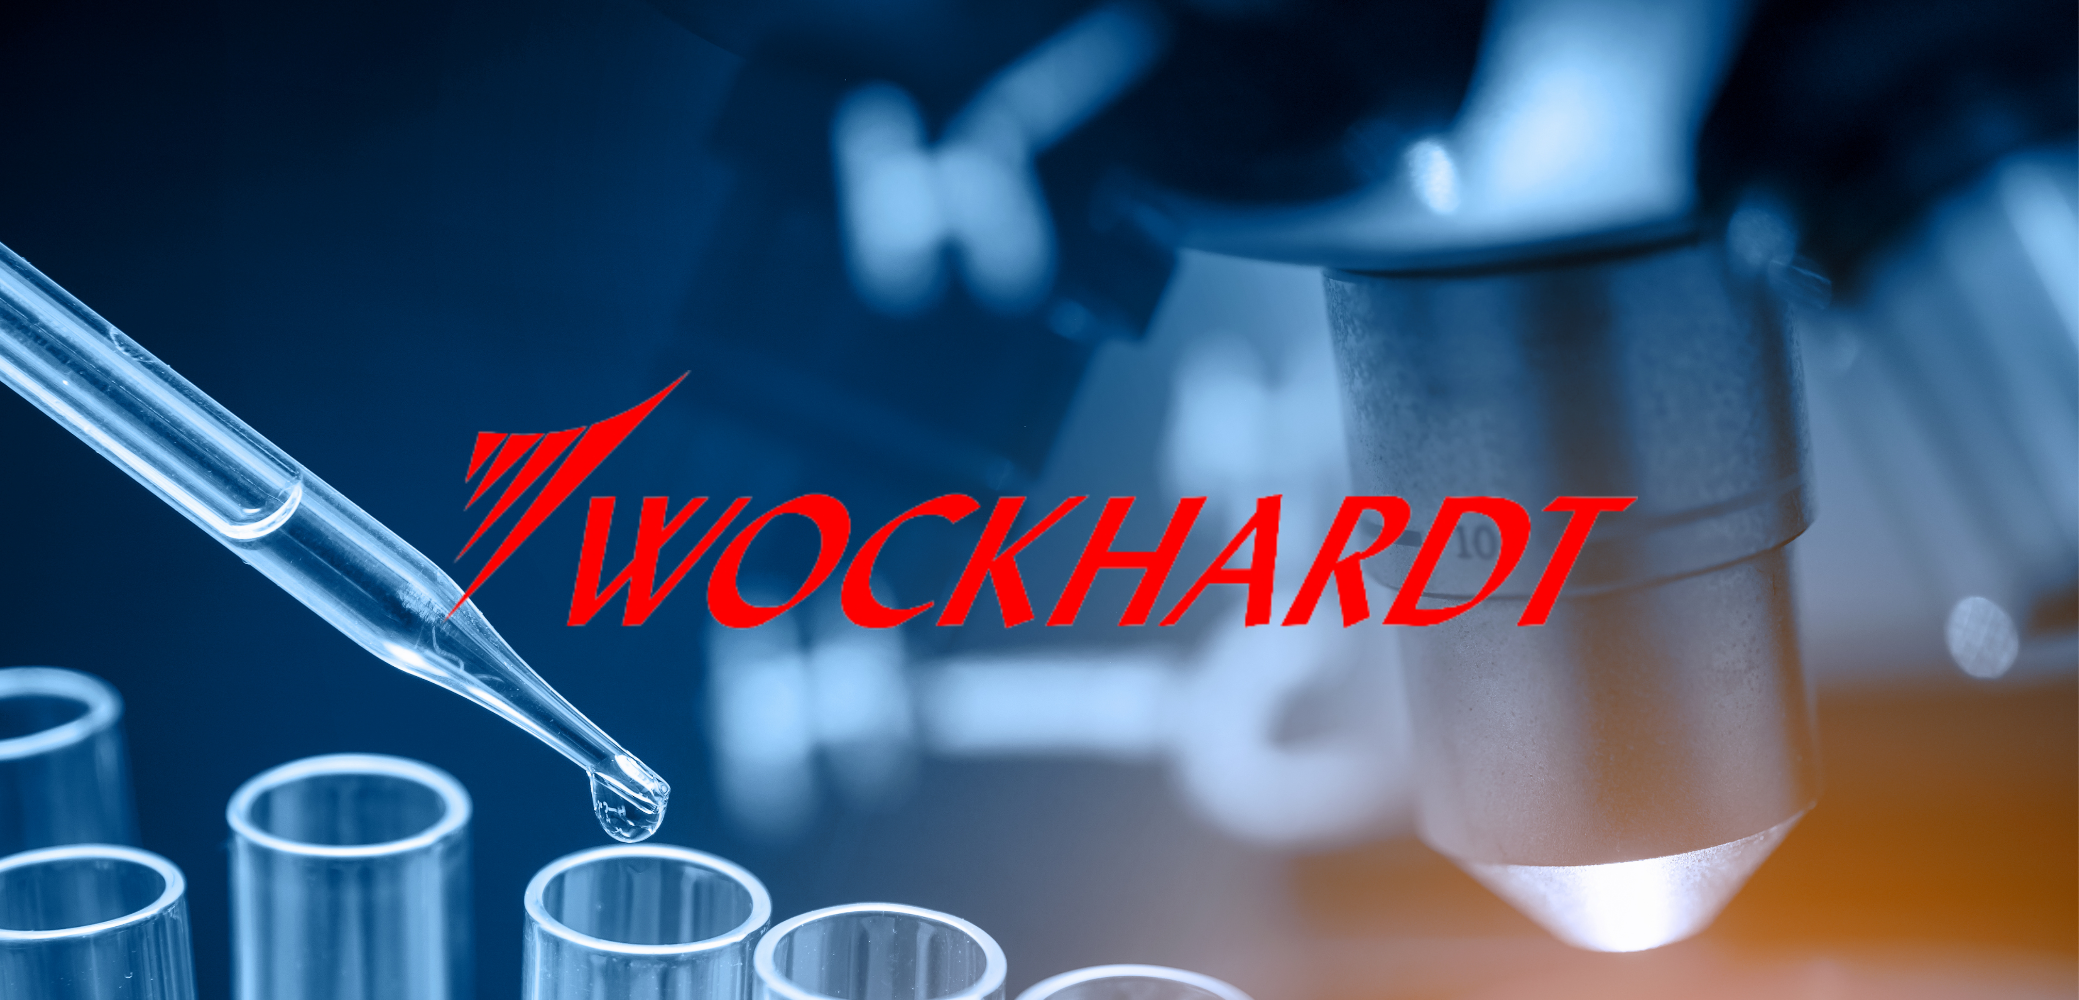 Day 1: Wockhardt Multi-Million Dollar 2-Day Auction: Late Model OTC Liquid Processing, Liquid Filling, Secondary Packaging, Huge Lab & Support